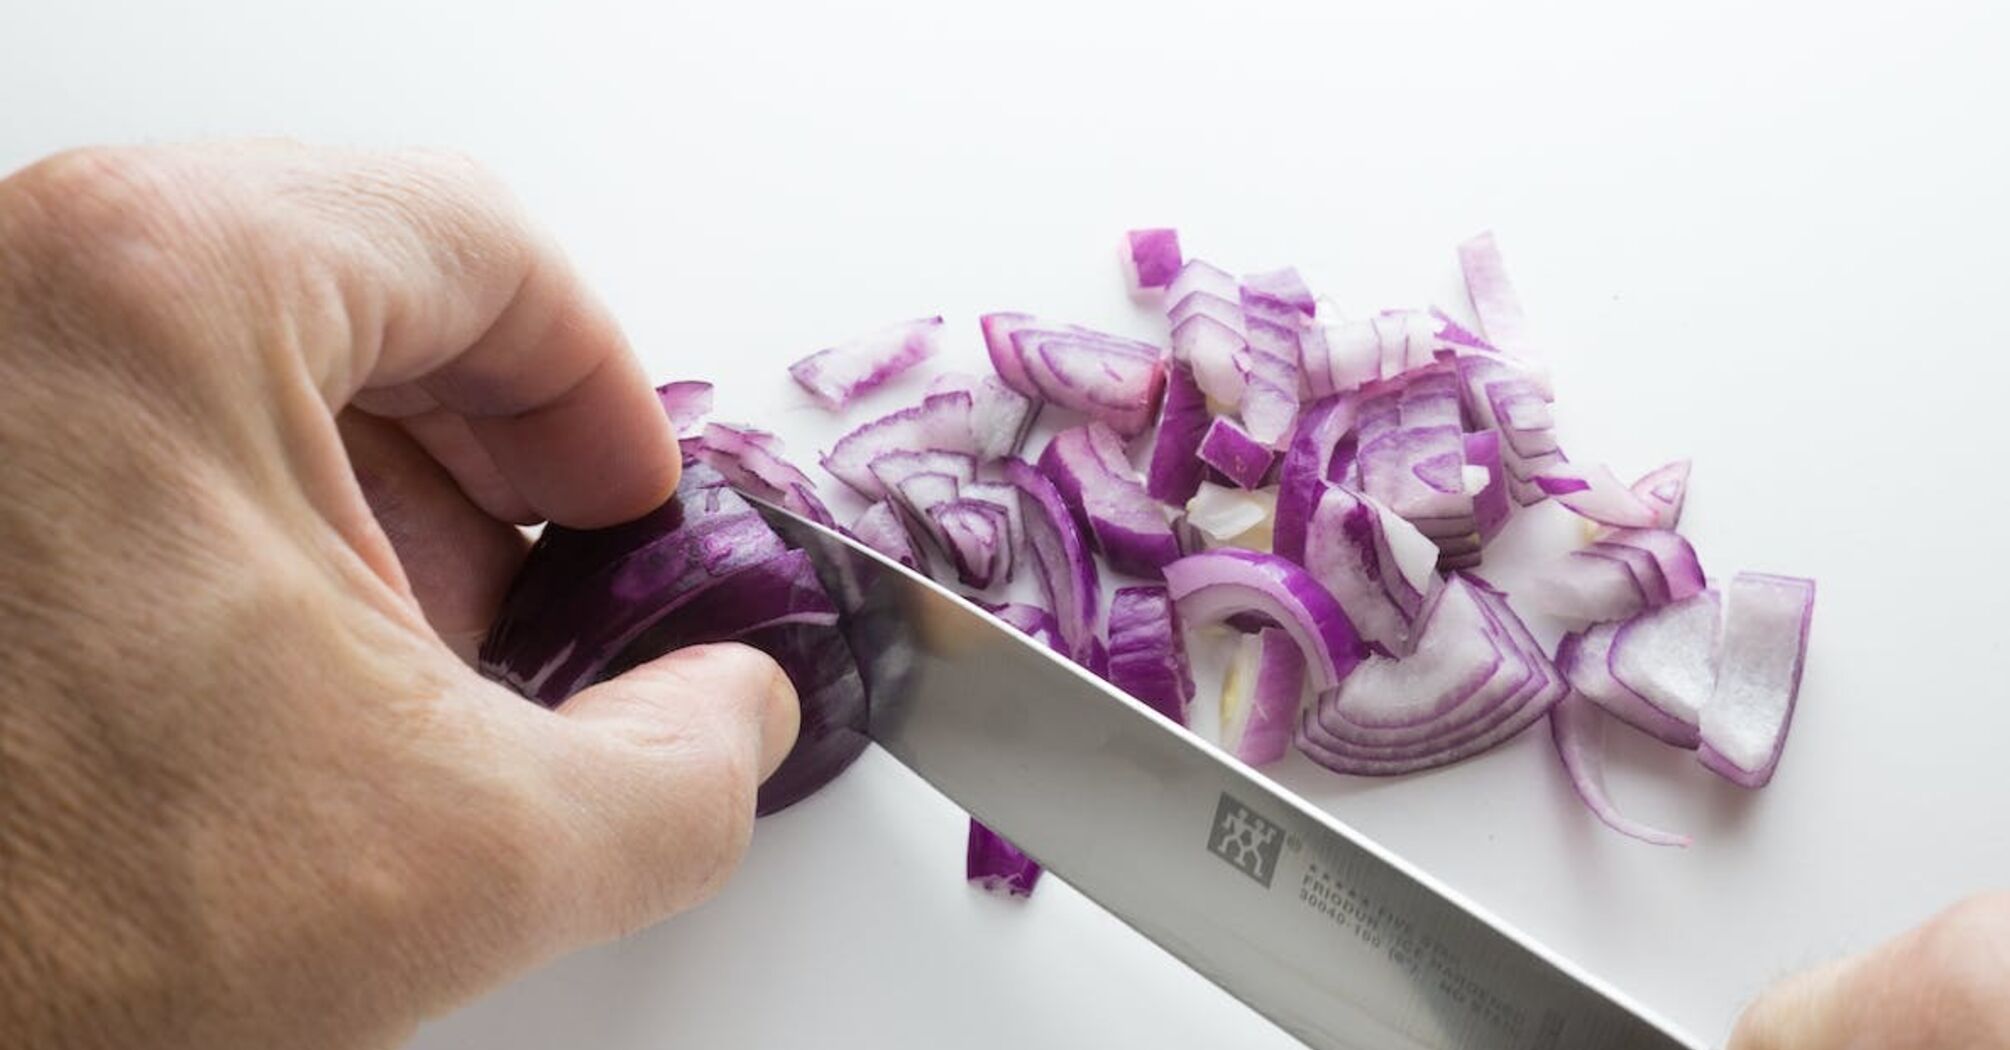 How to cut onions without tears: professionals recommend using cold